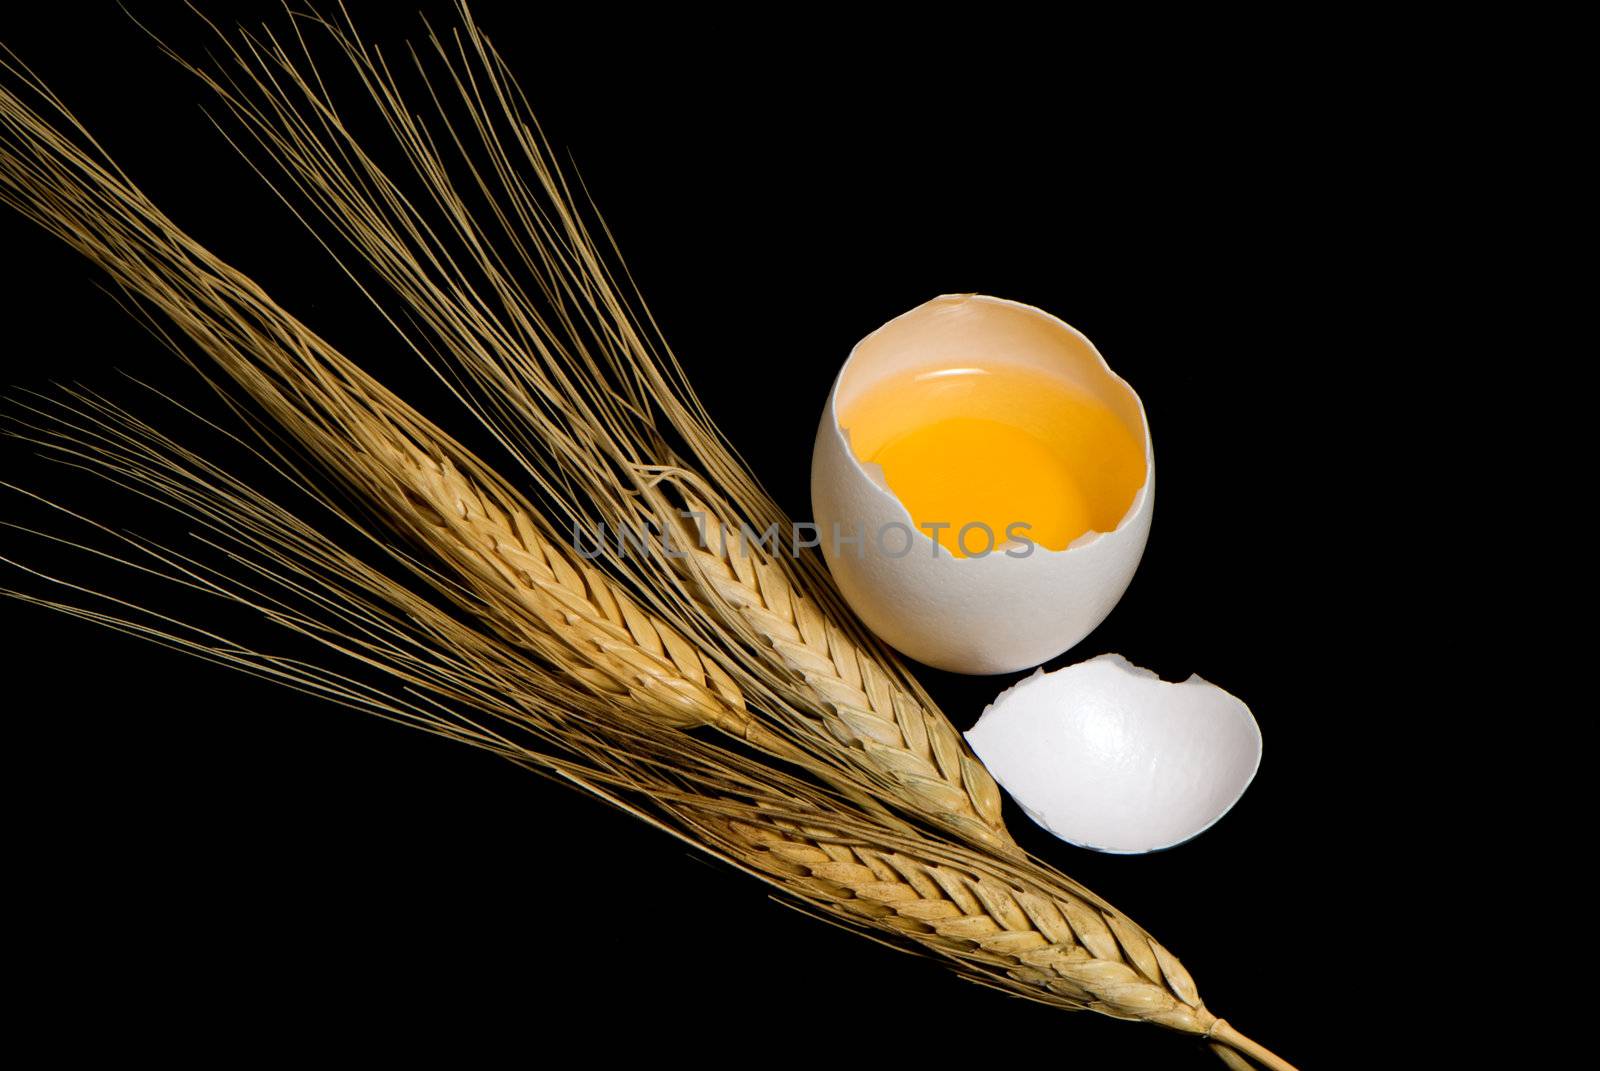 Ears of wheat and egg on a black background